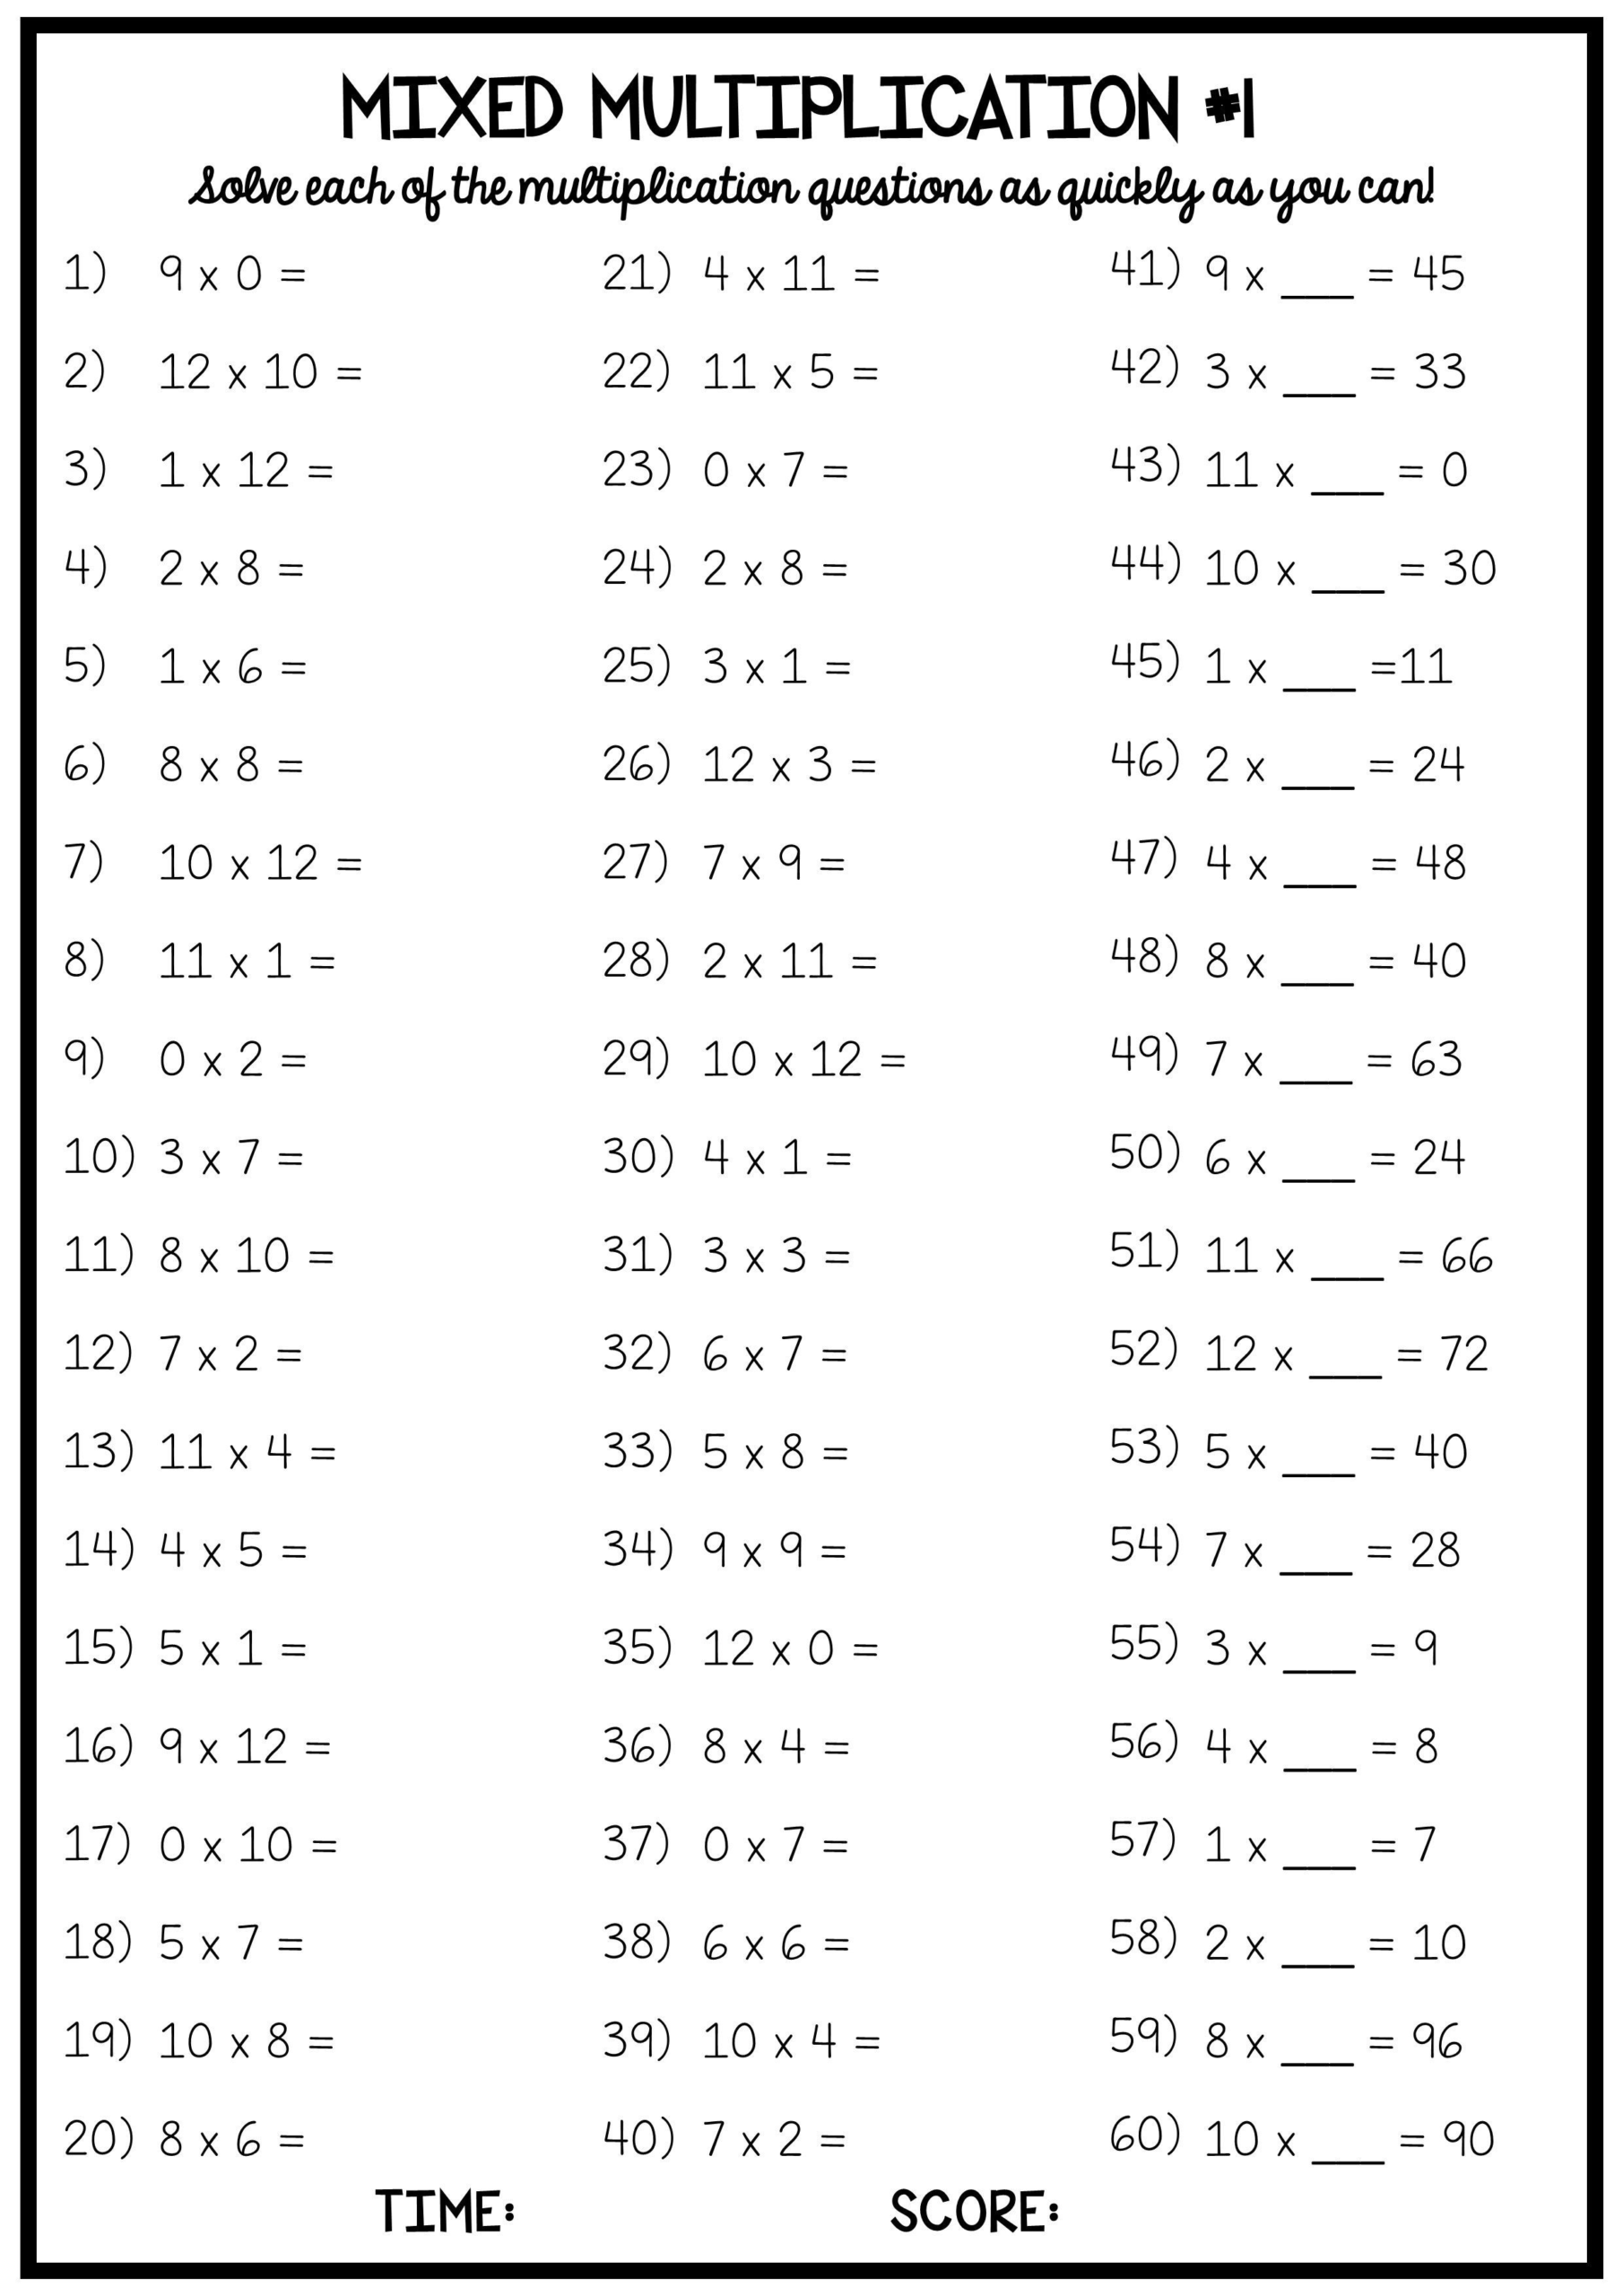 multiplication-timed-tests-the-curriculum-corner-123-free-printable-multiplication-speed